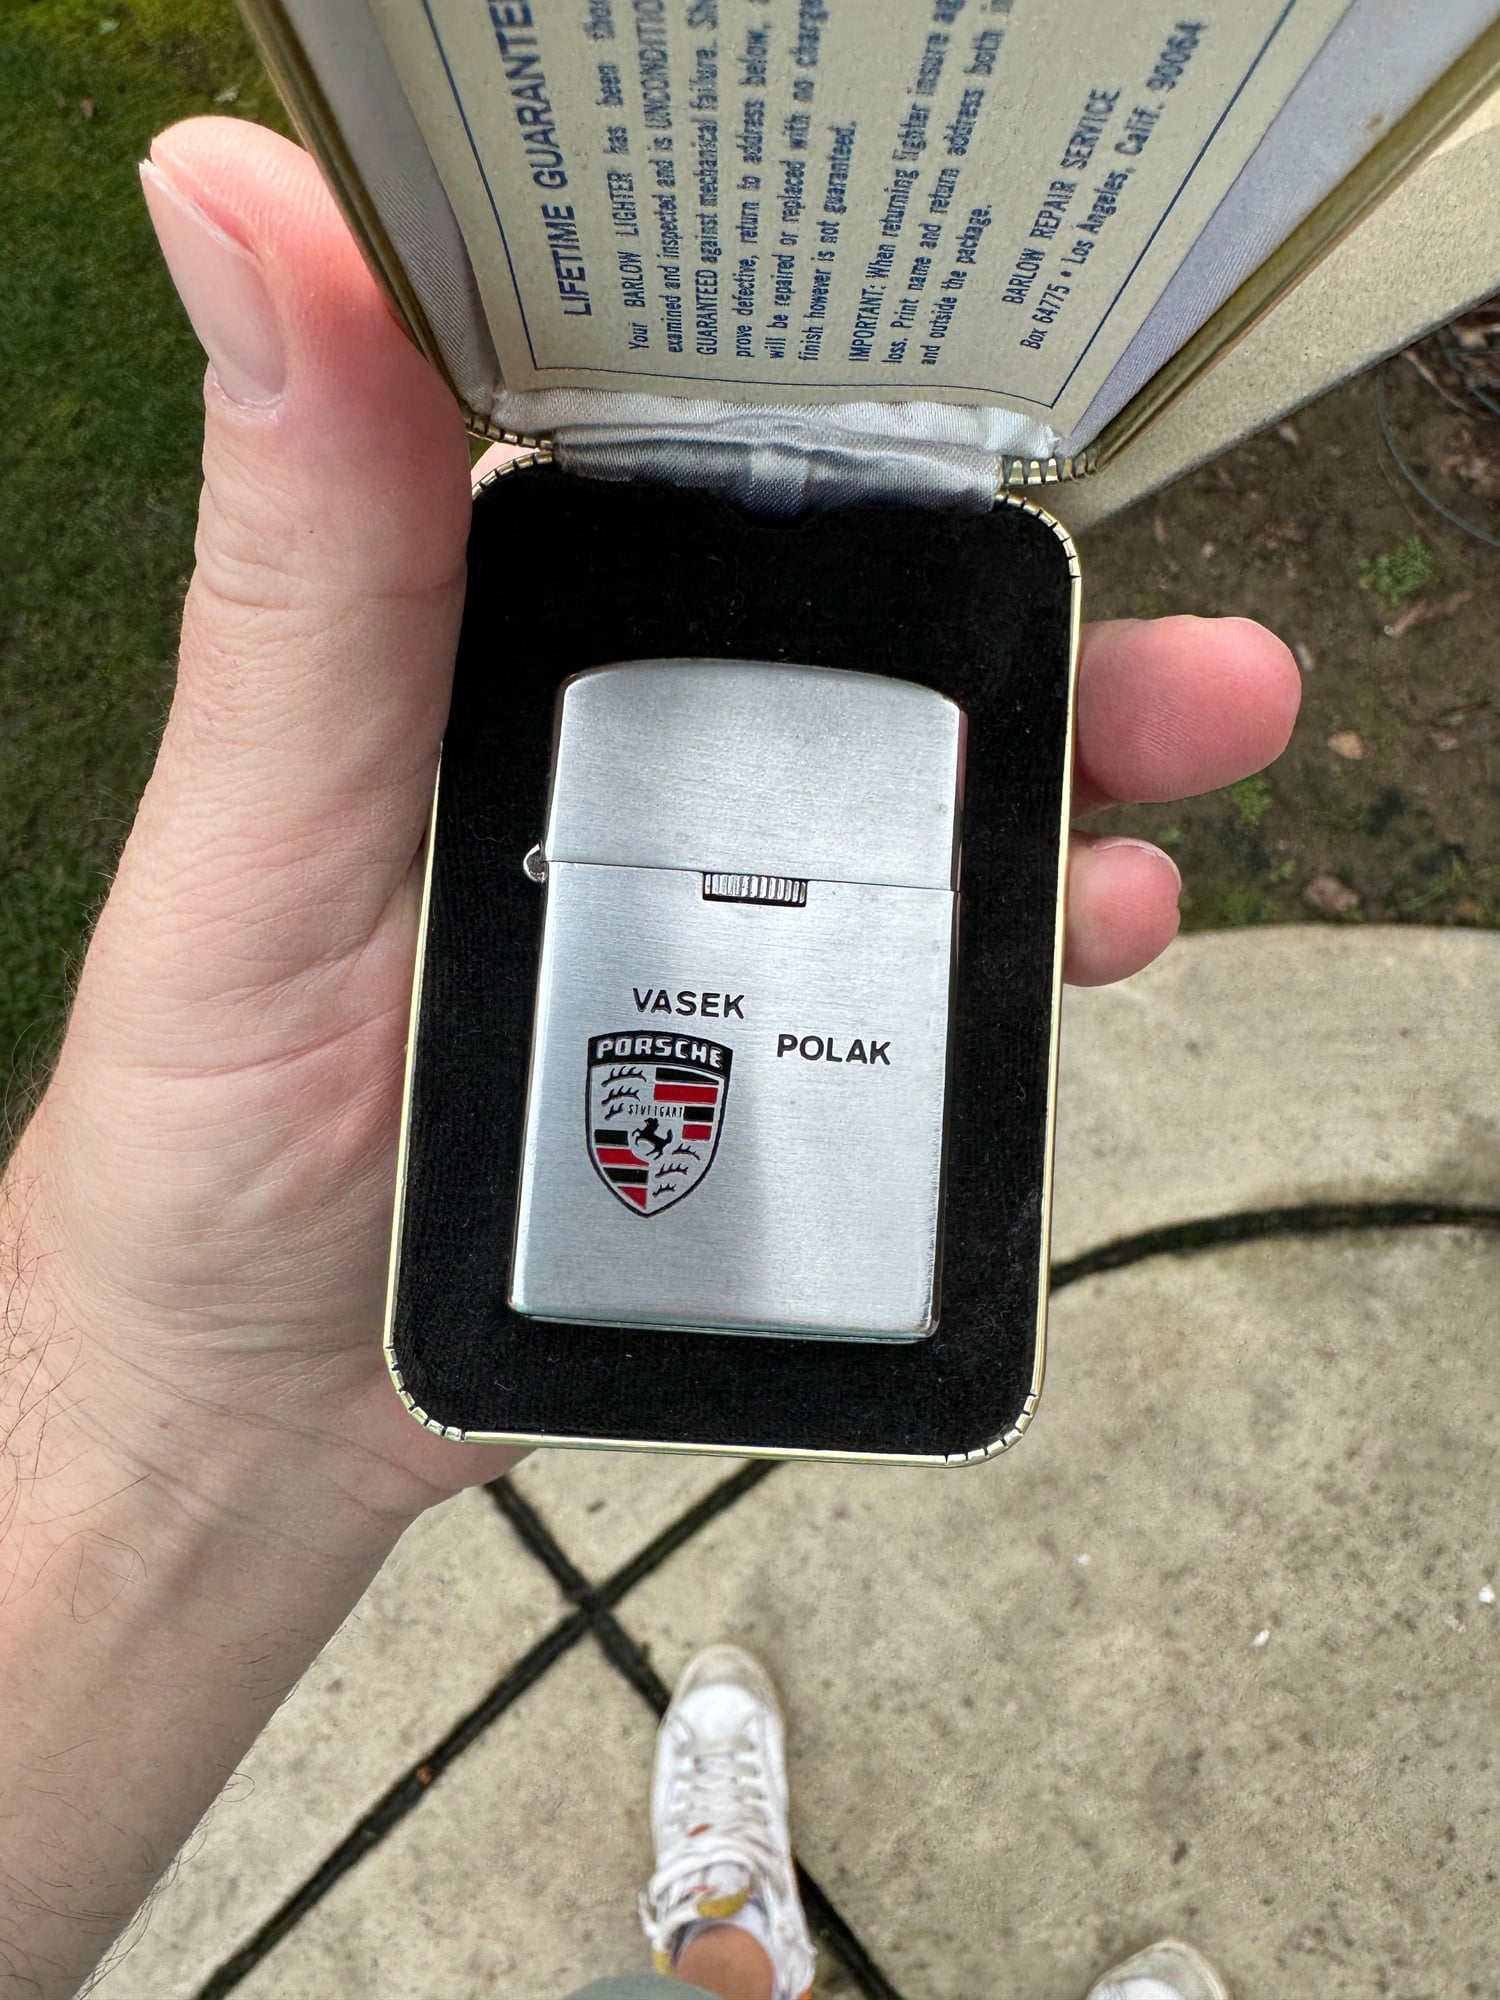 Miscellaneous - Vintage Vasek Polak Porsche Lighter, Period Correct x RUF hat and shirt, Jackets... - Used - Cupertino, CA 95014, United States